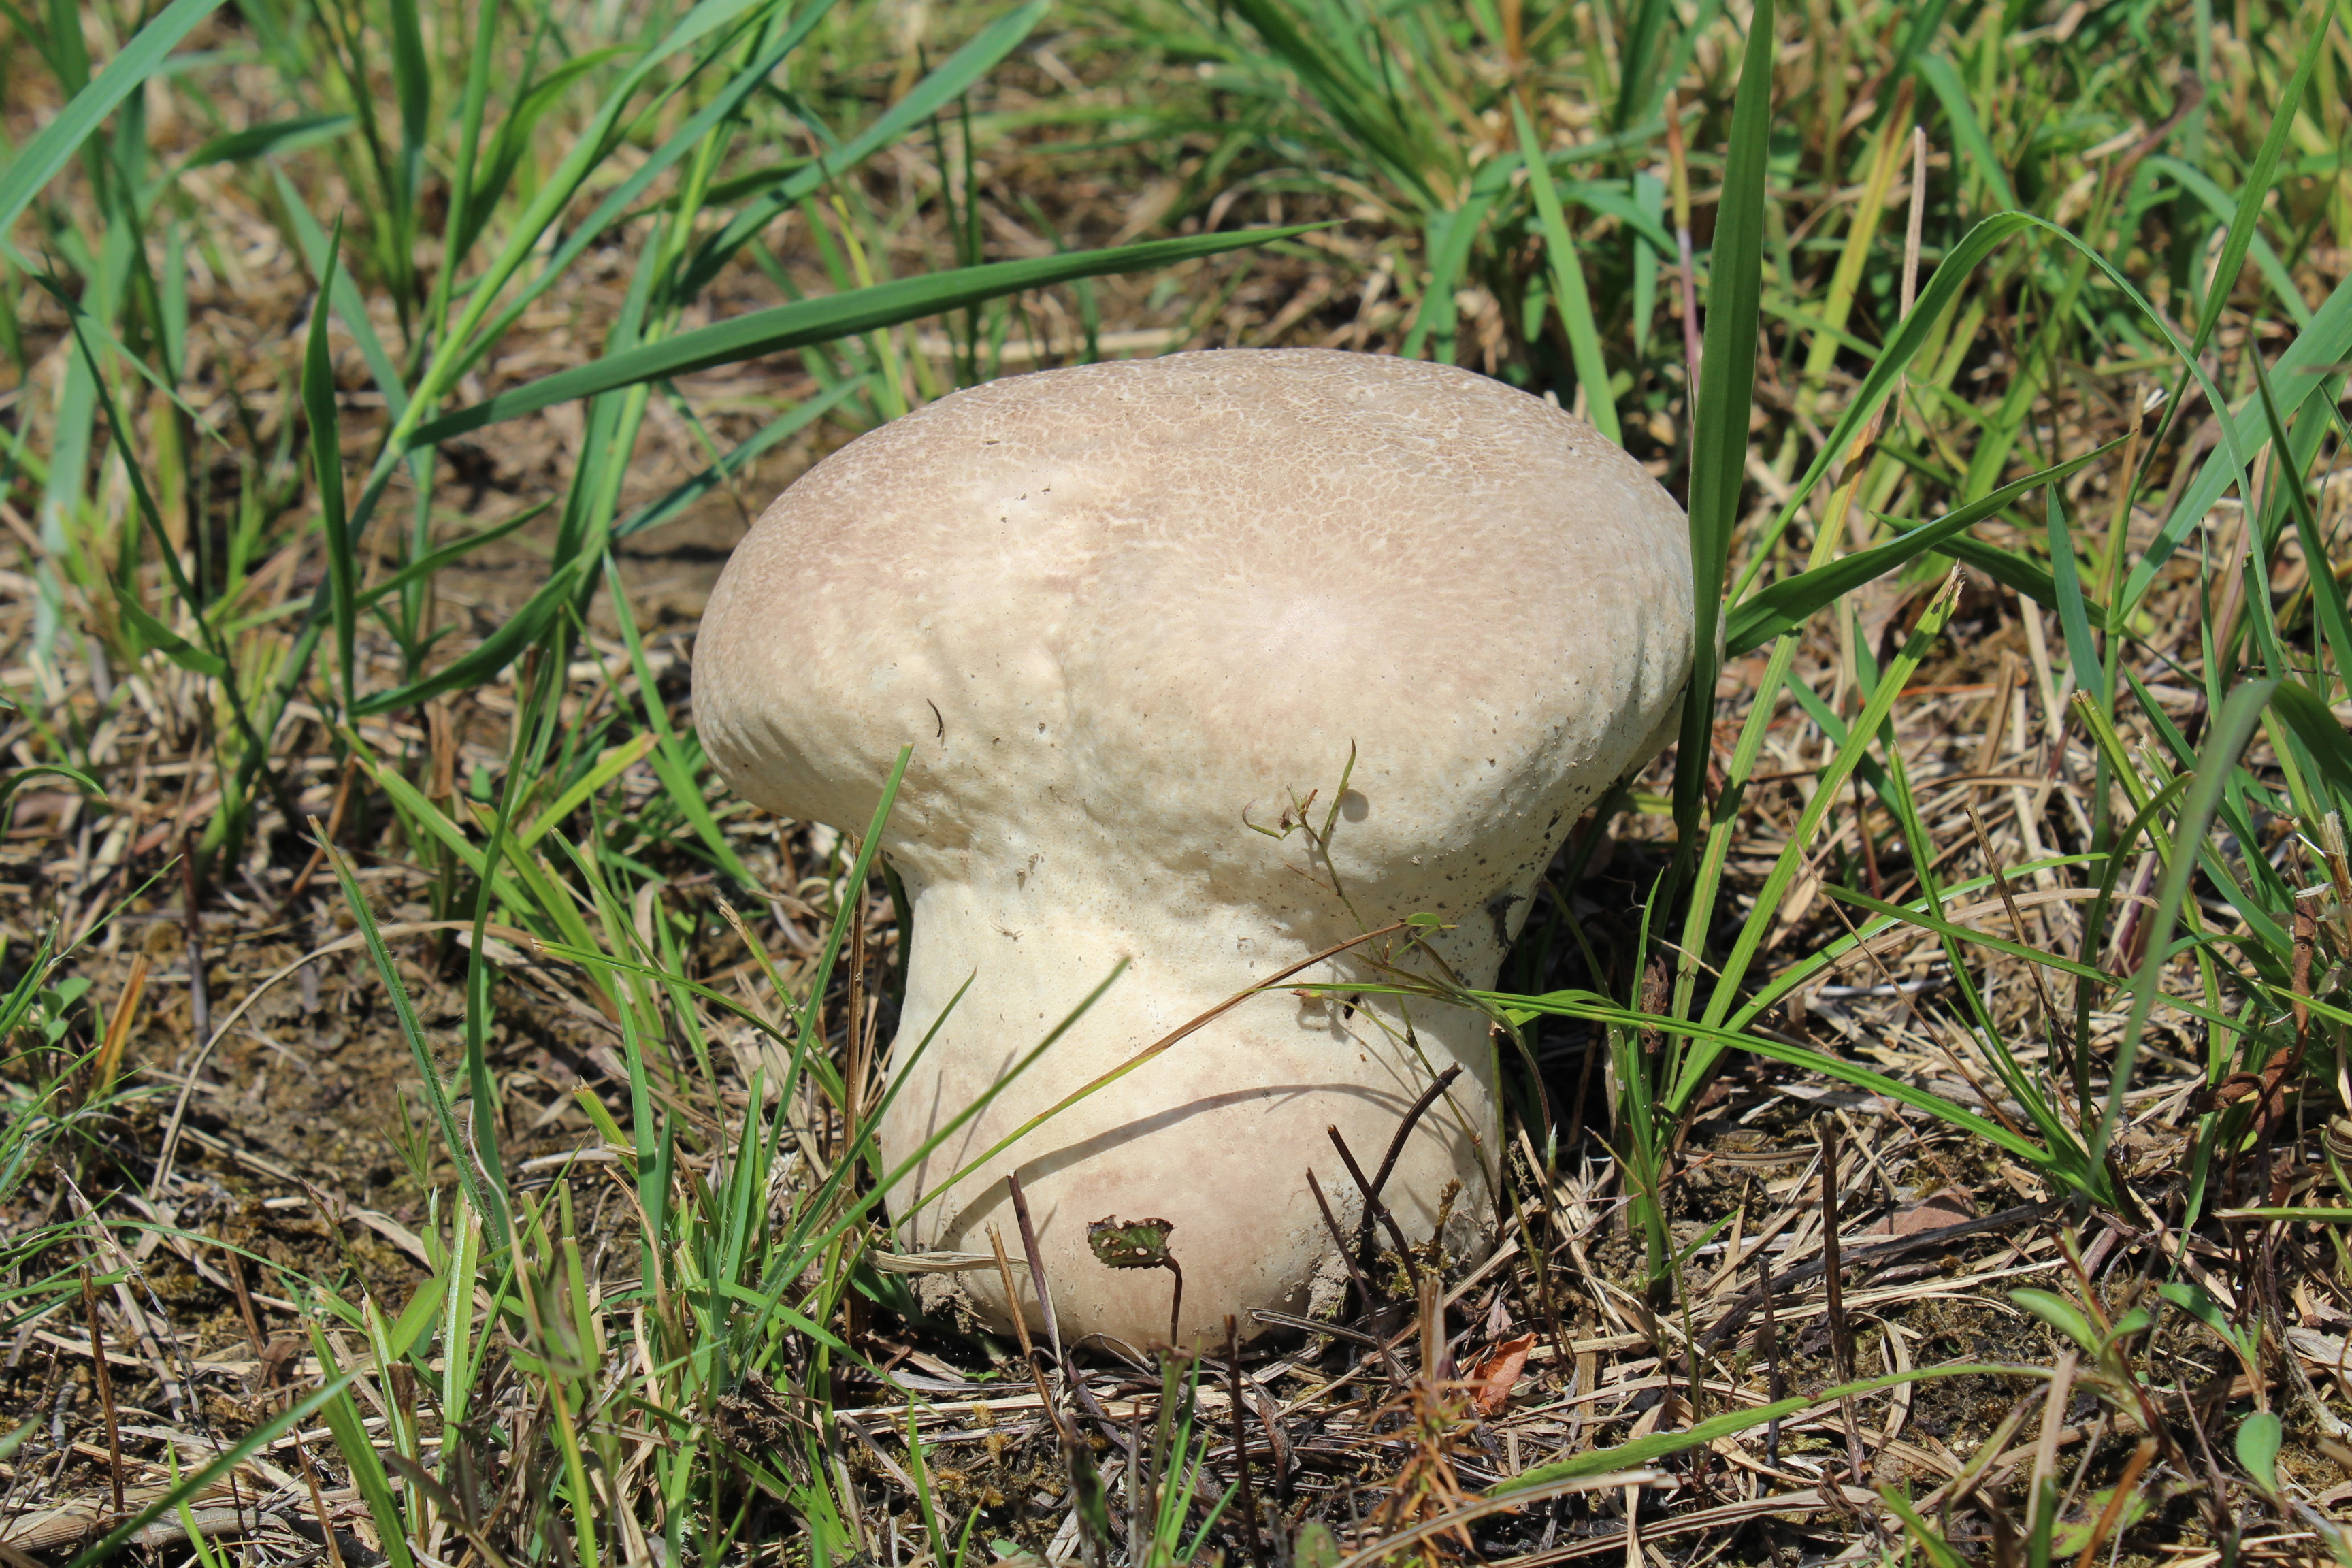 White, brain-shaped mushroom in a meadow. Giant puffball is about the size of a soccer ball.